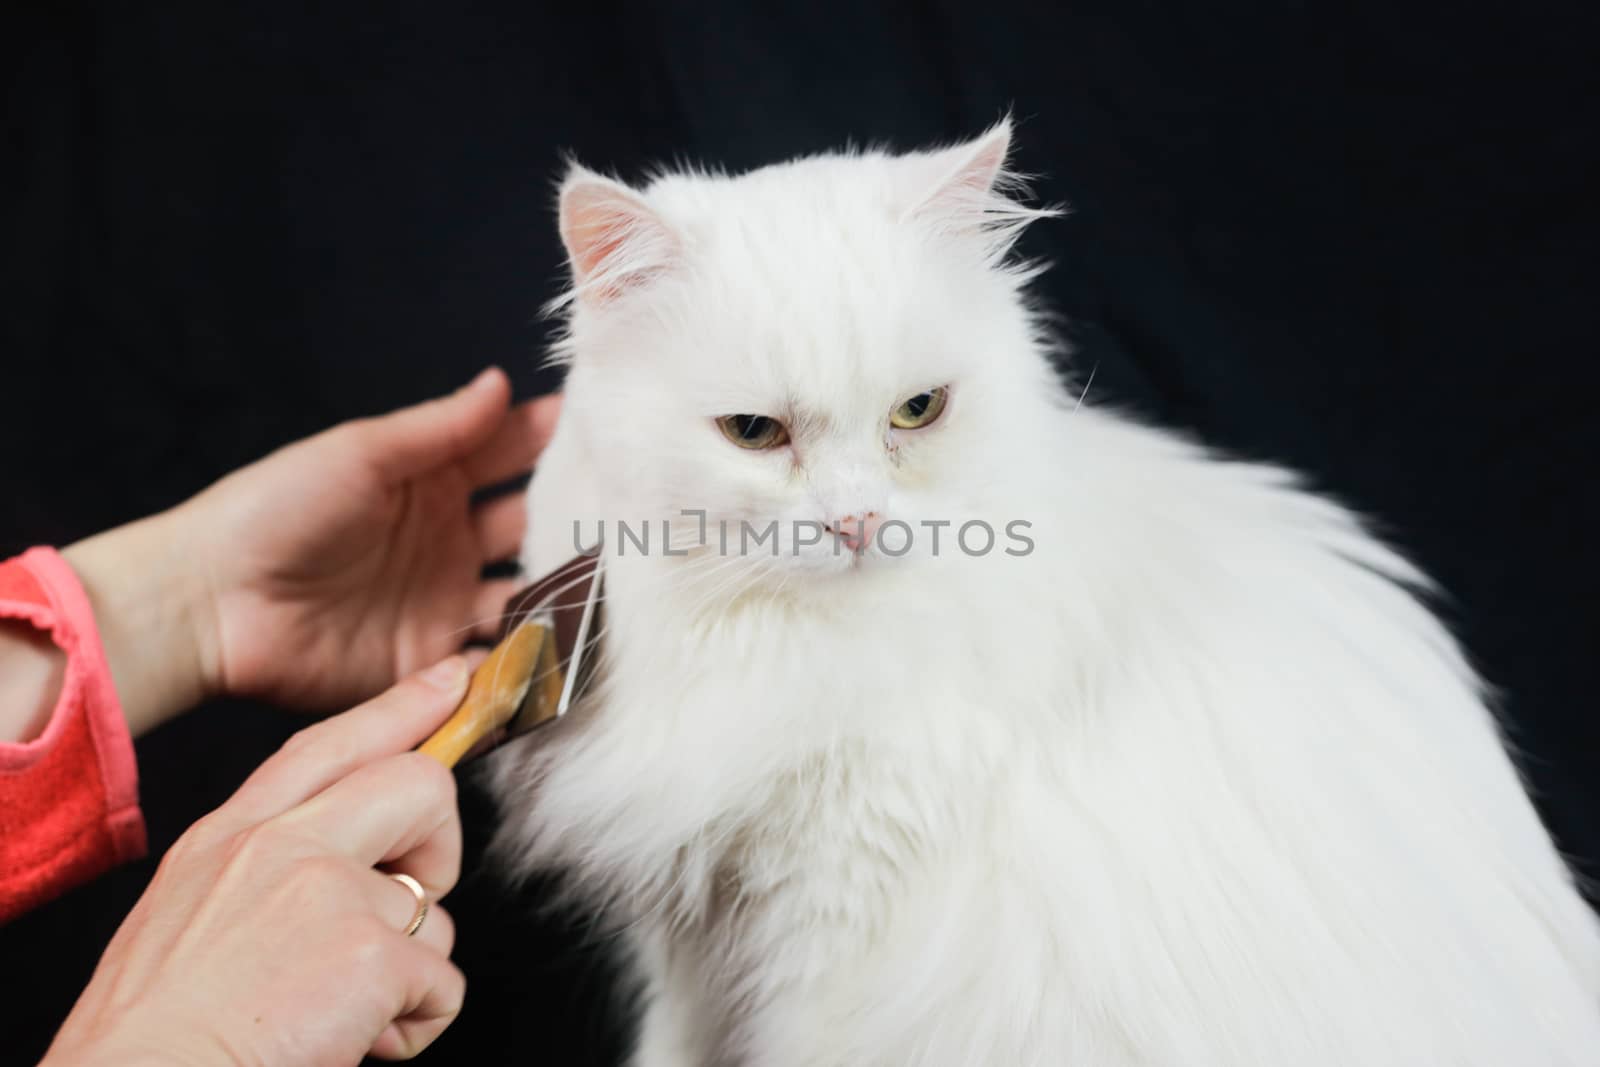 Cat combing. Long hair, cat's hairstyle. Pet care